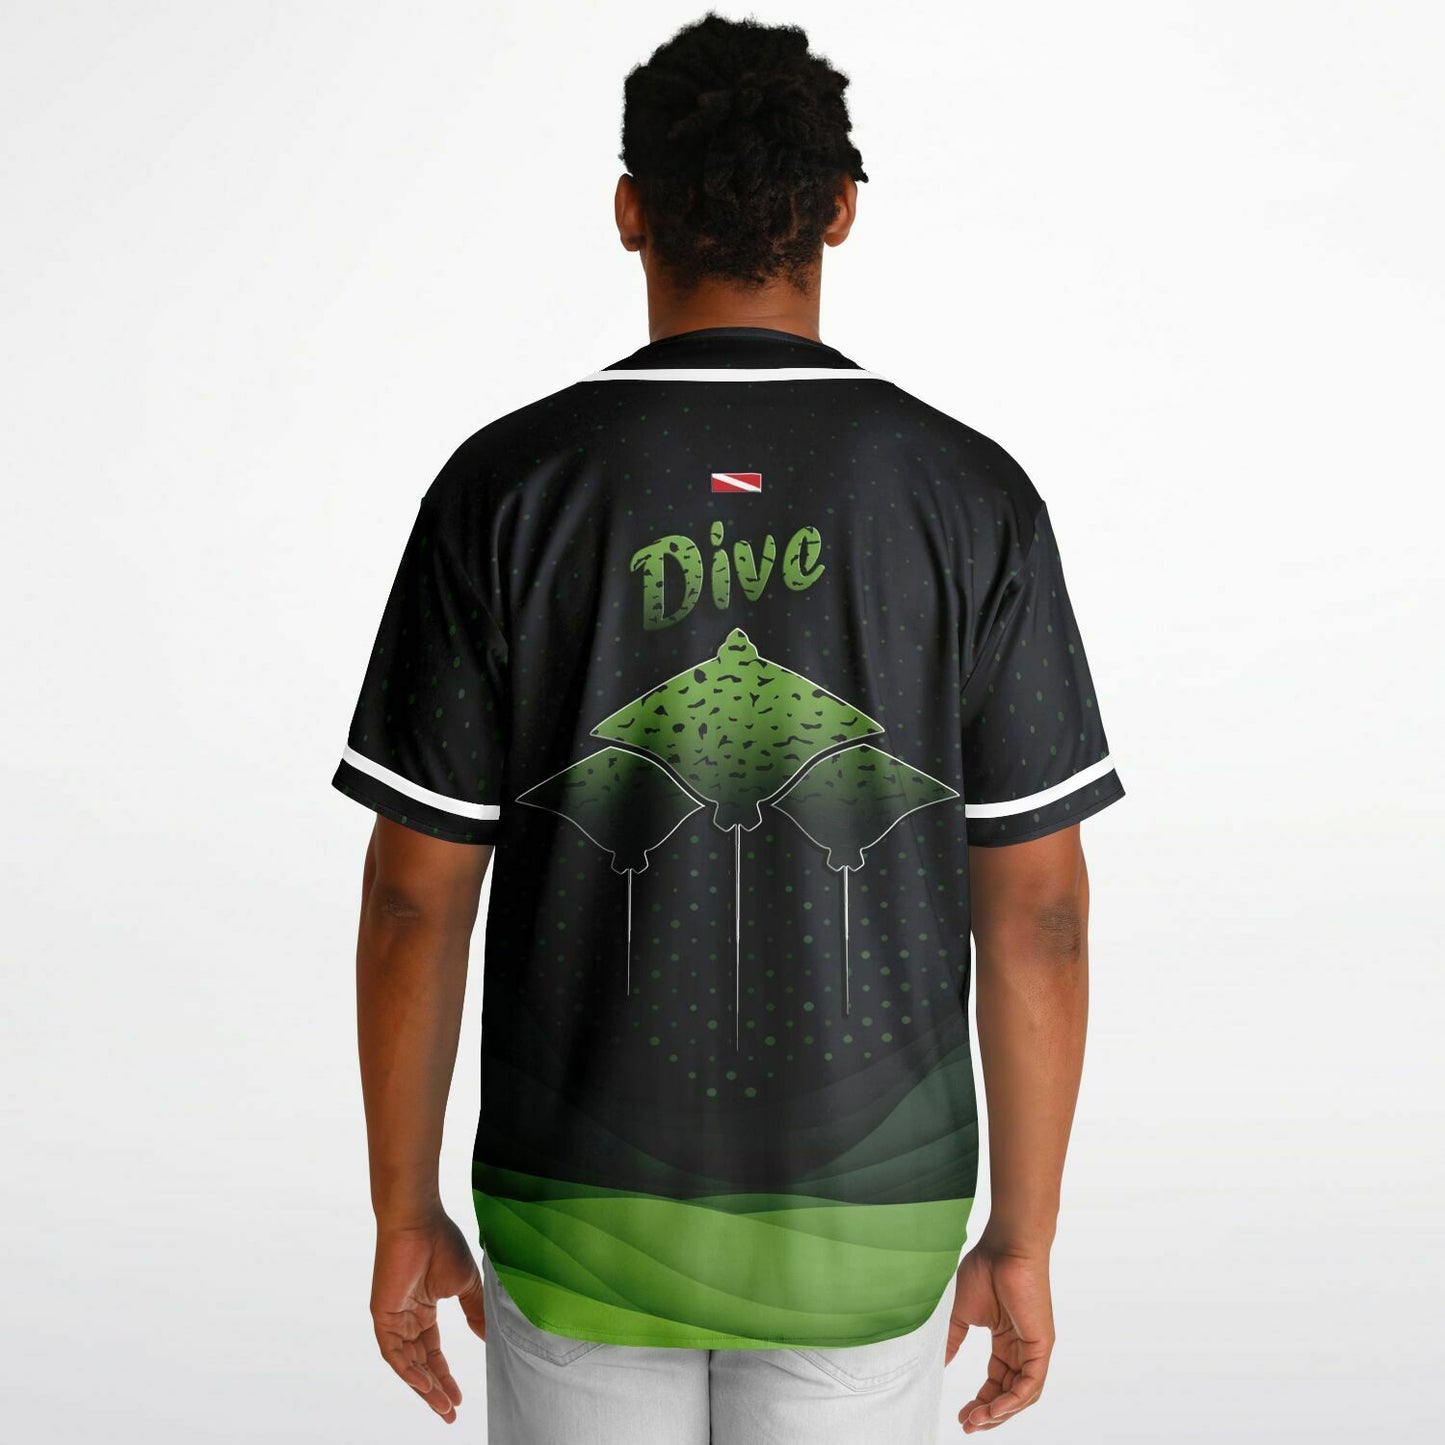 Reversible Sting Ray Jersey